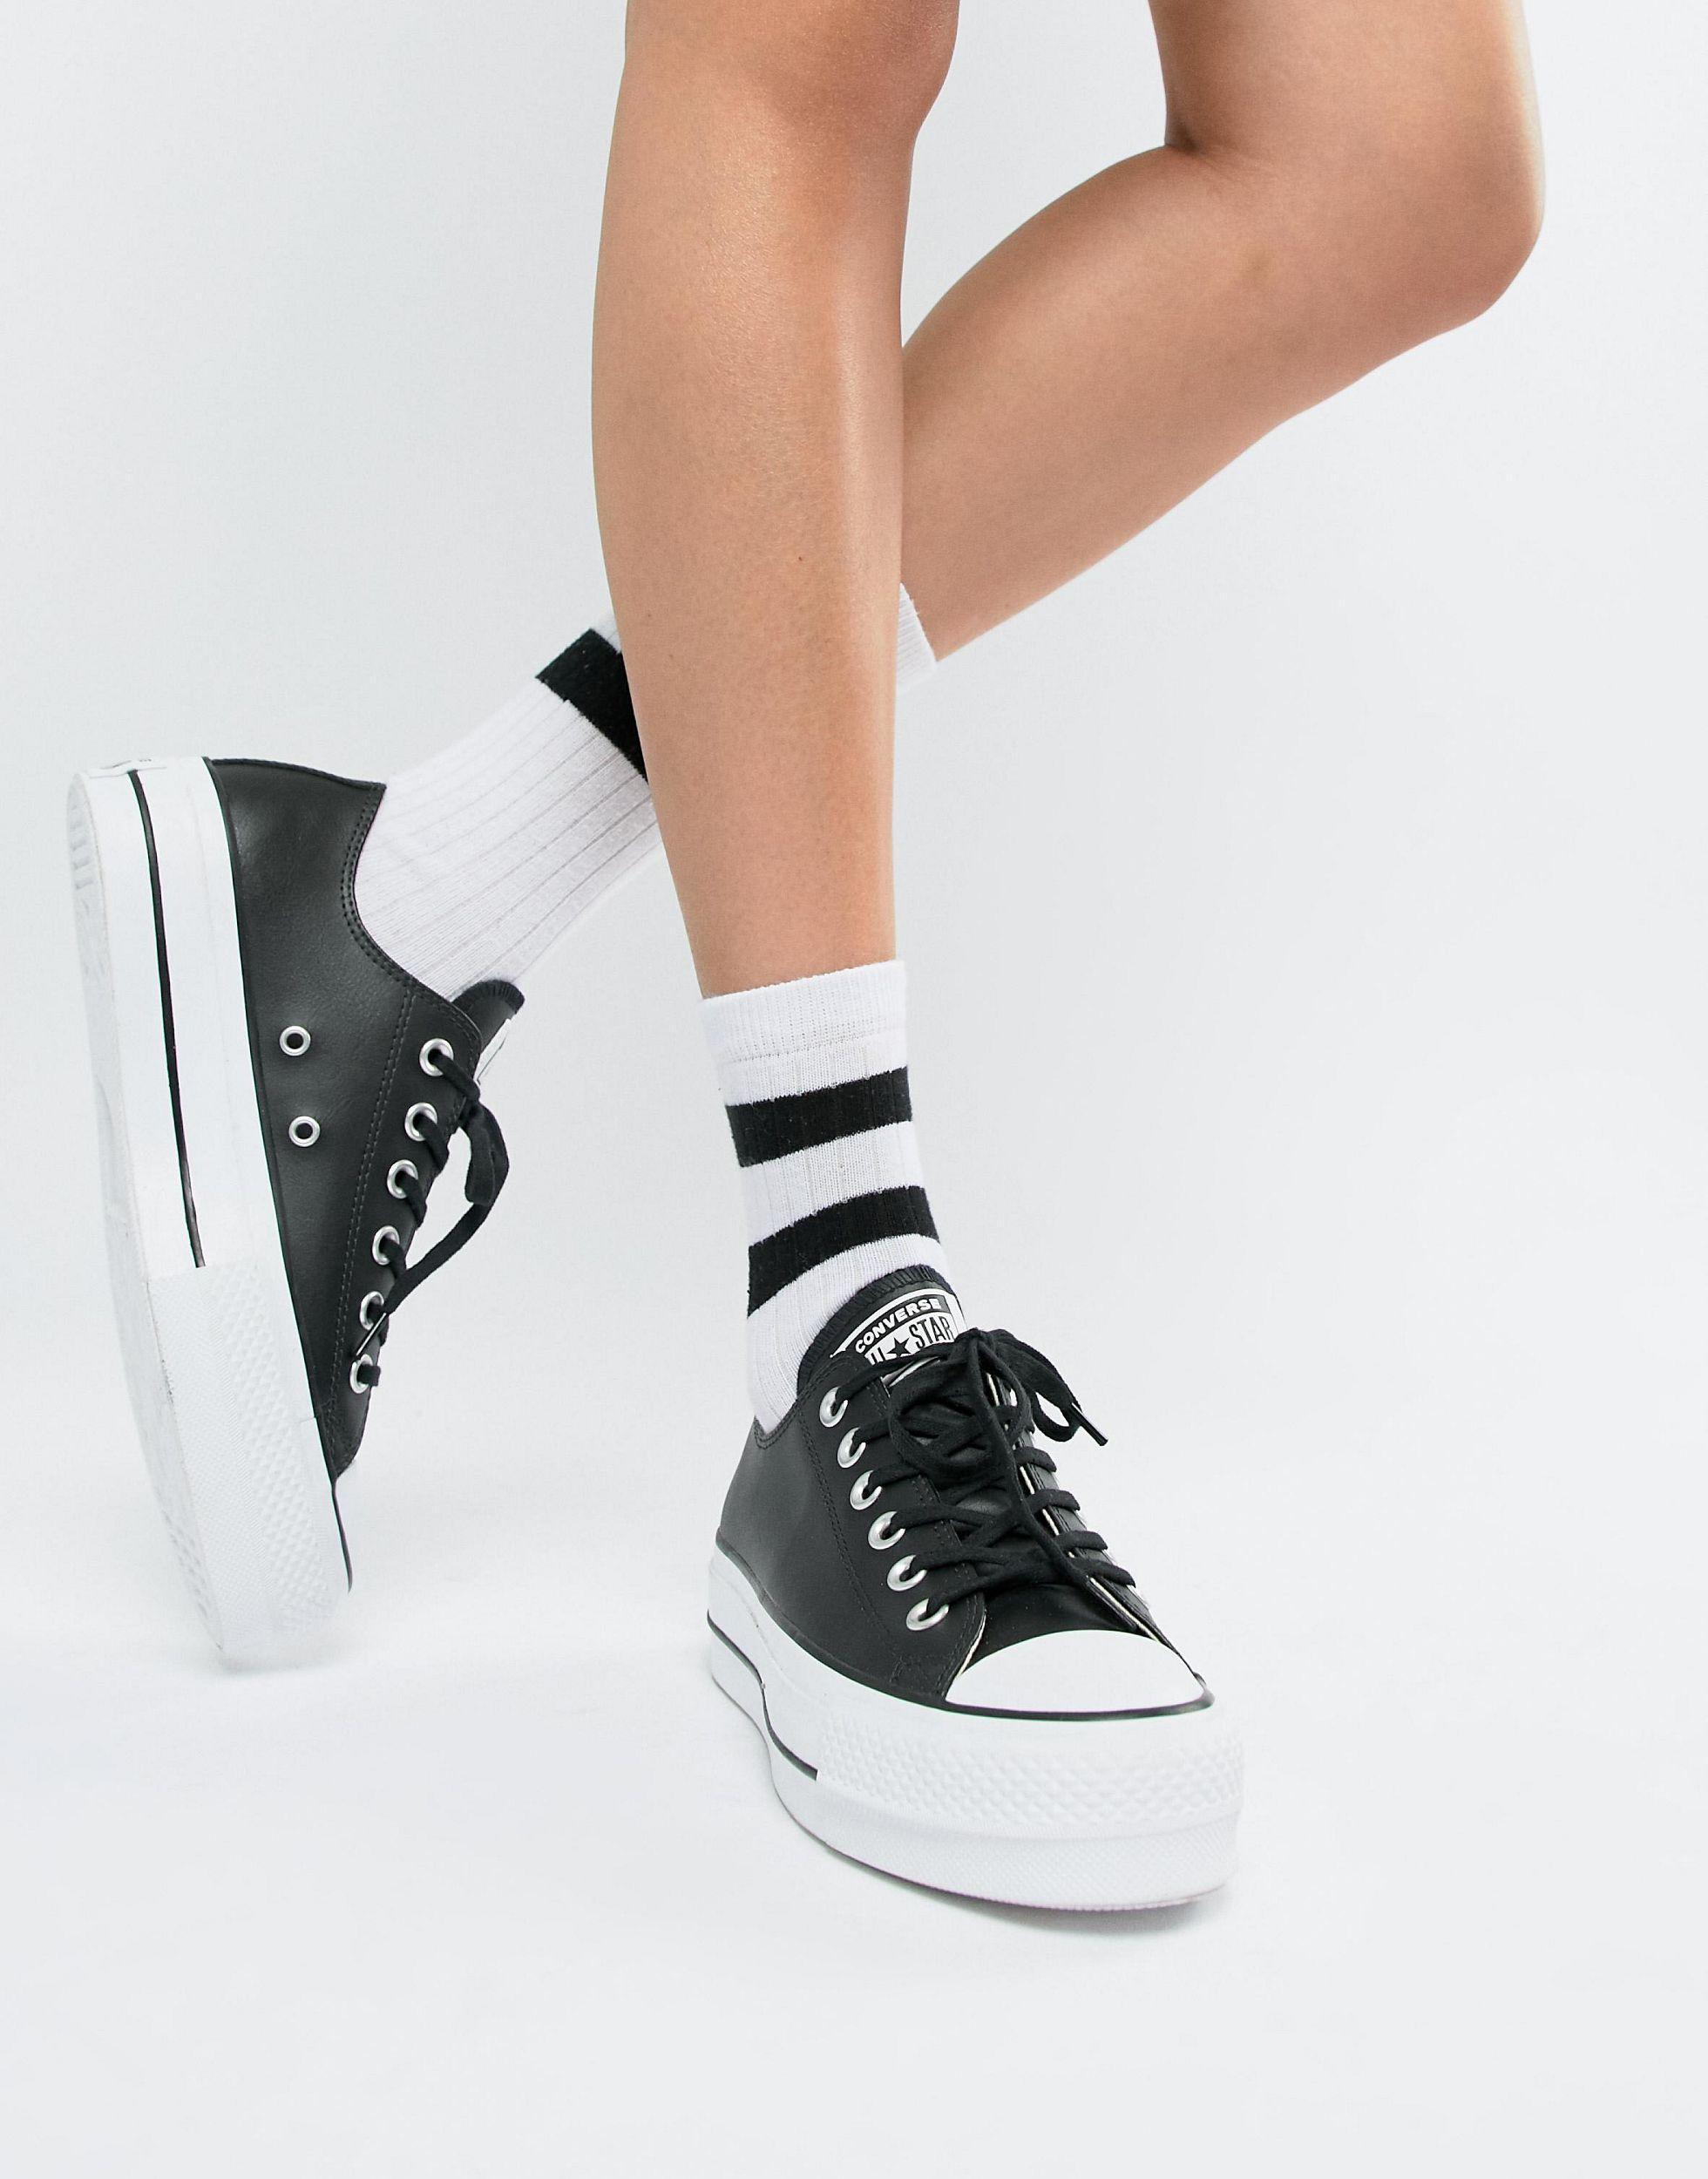 Converse Chuck Taylor All Star Leather Platform Low Trainers in Black | Lyst